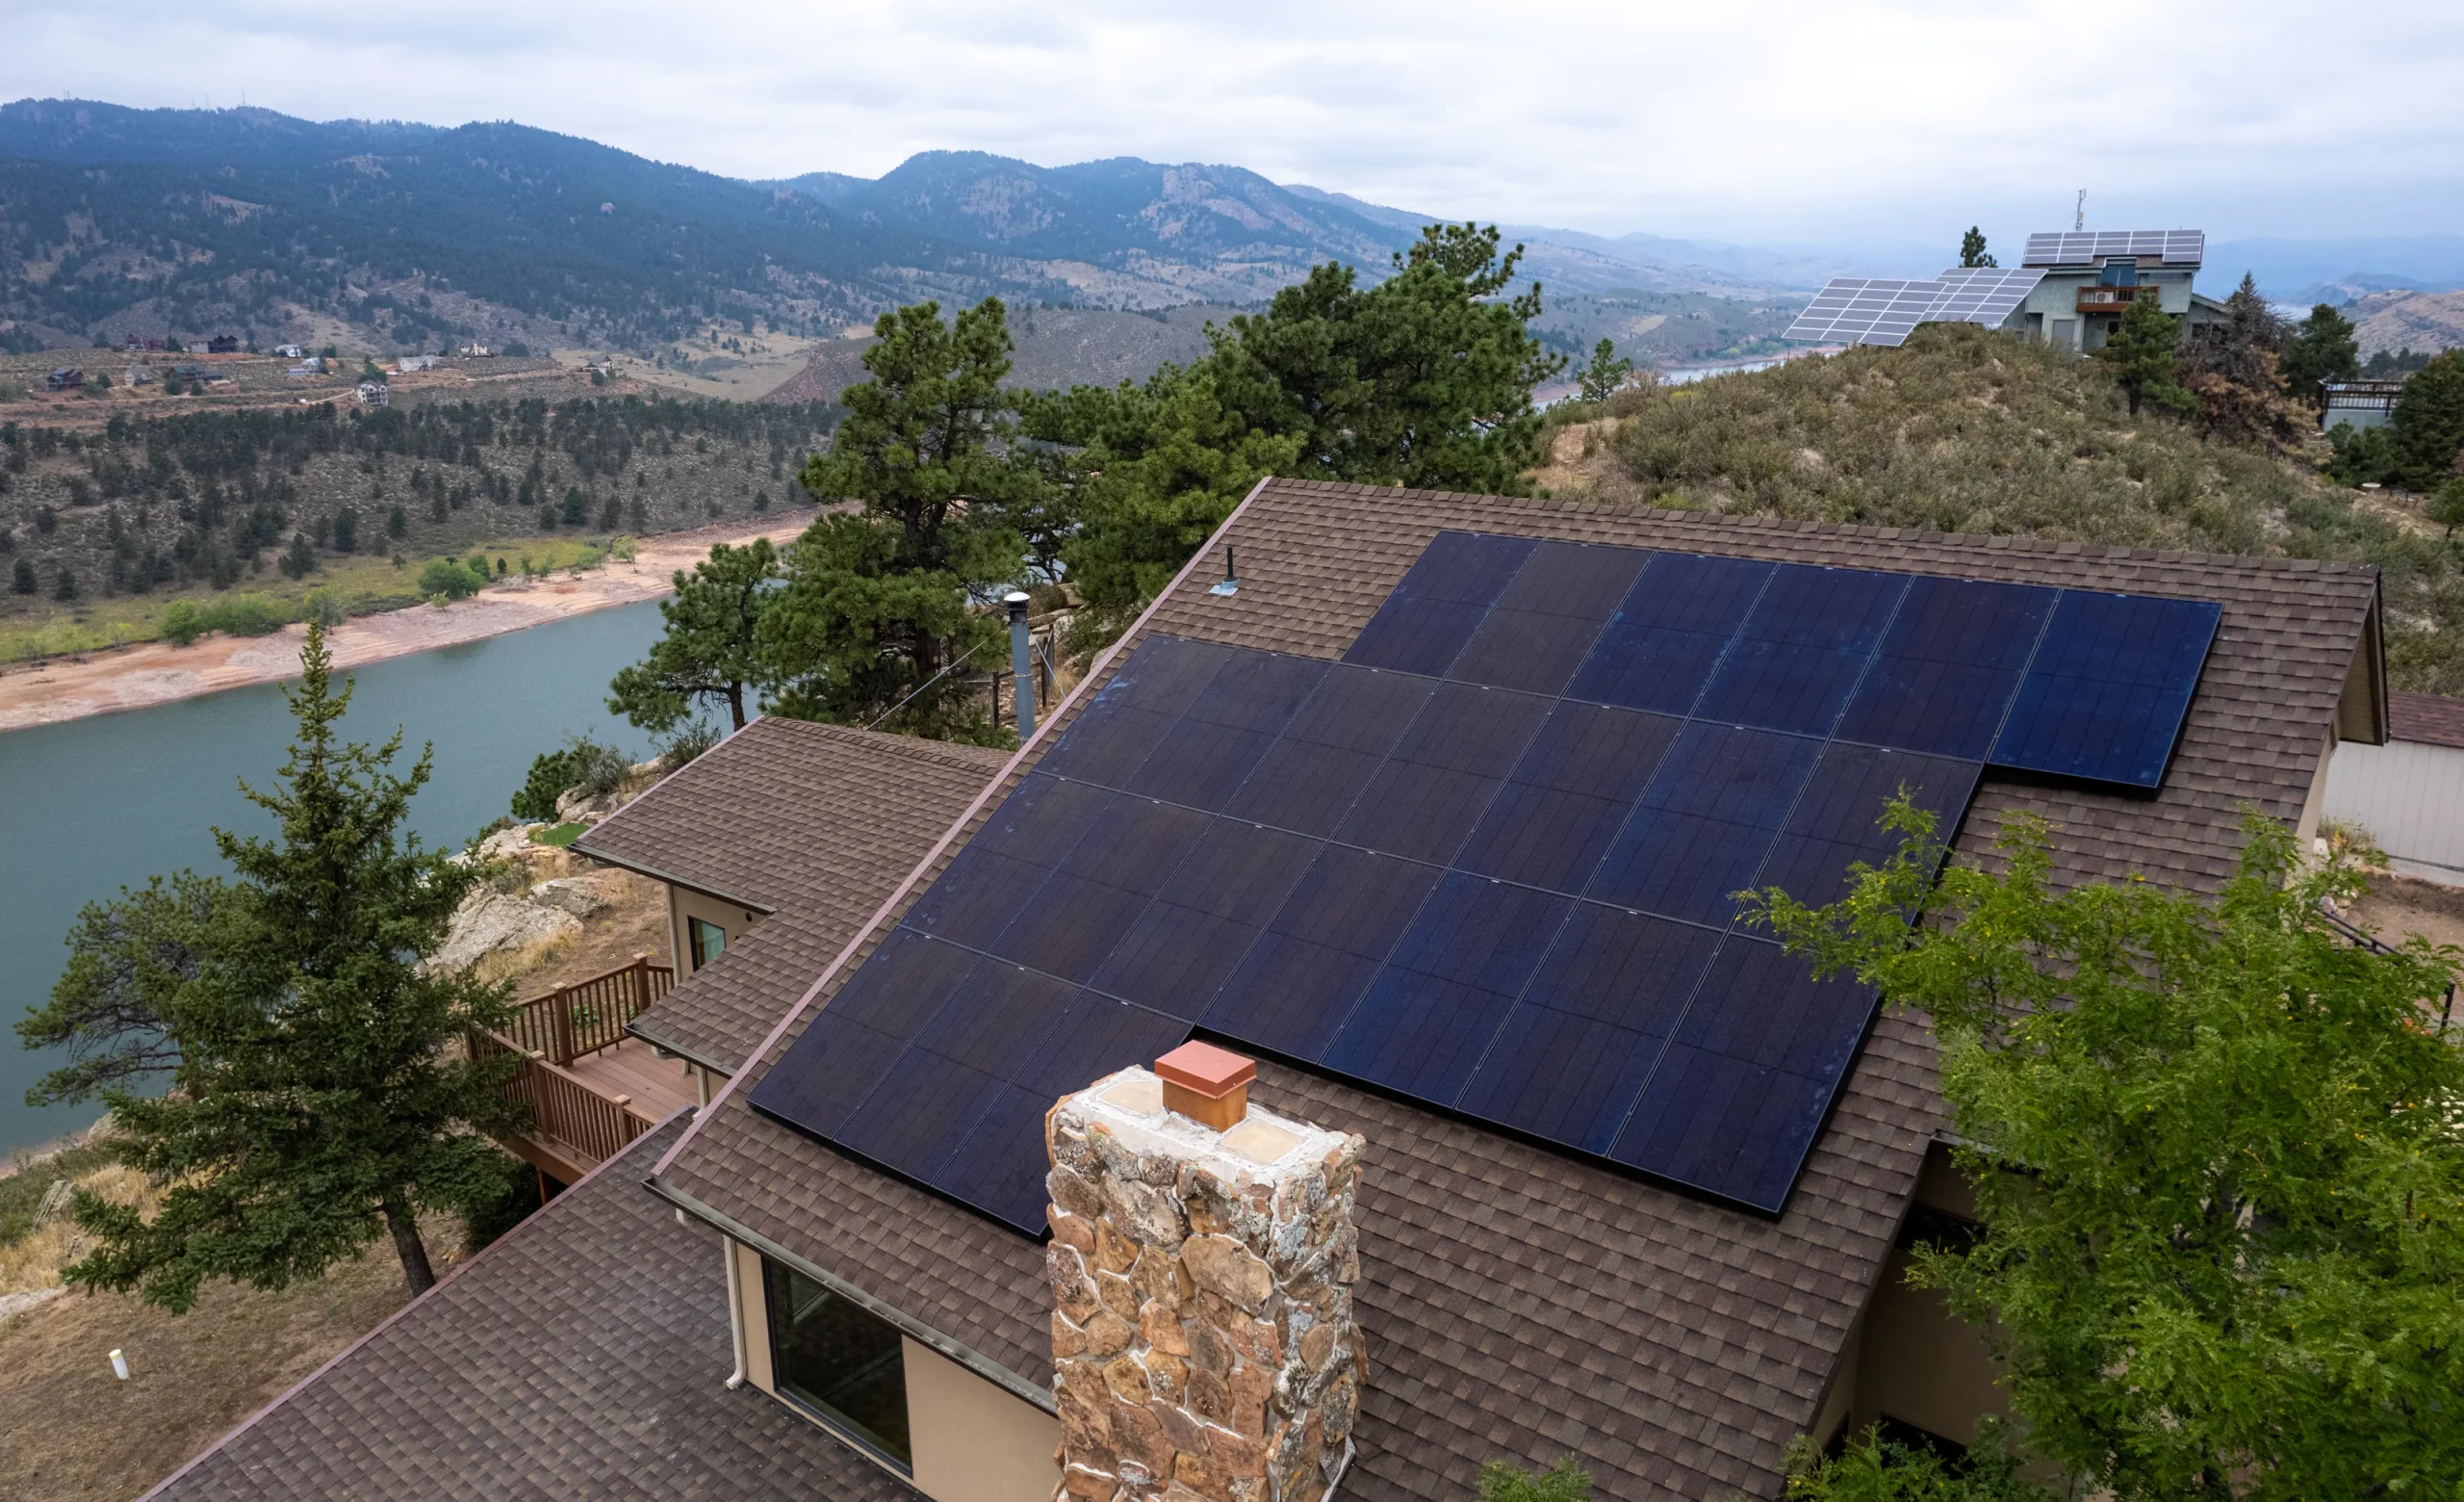 How Long Can Solar Battery Power a House During an Outage?